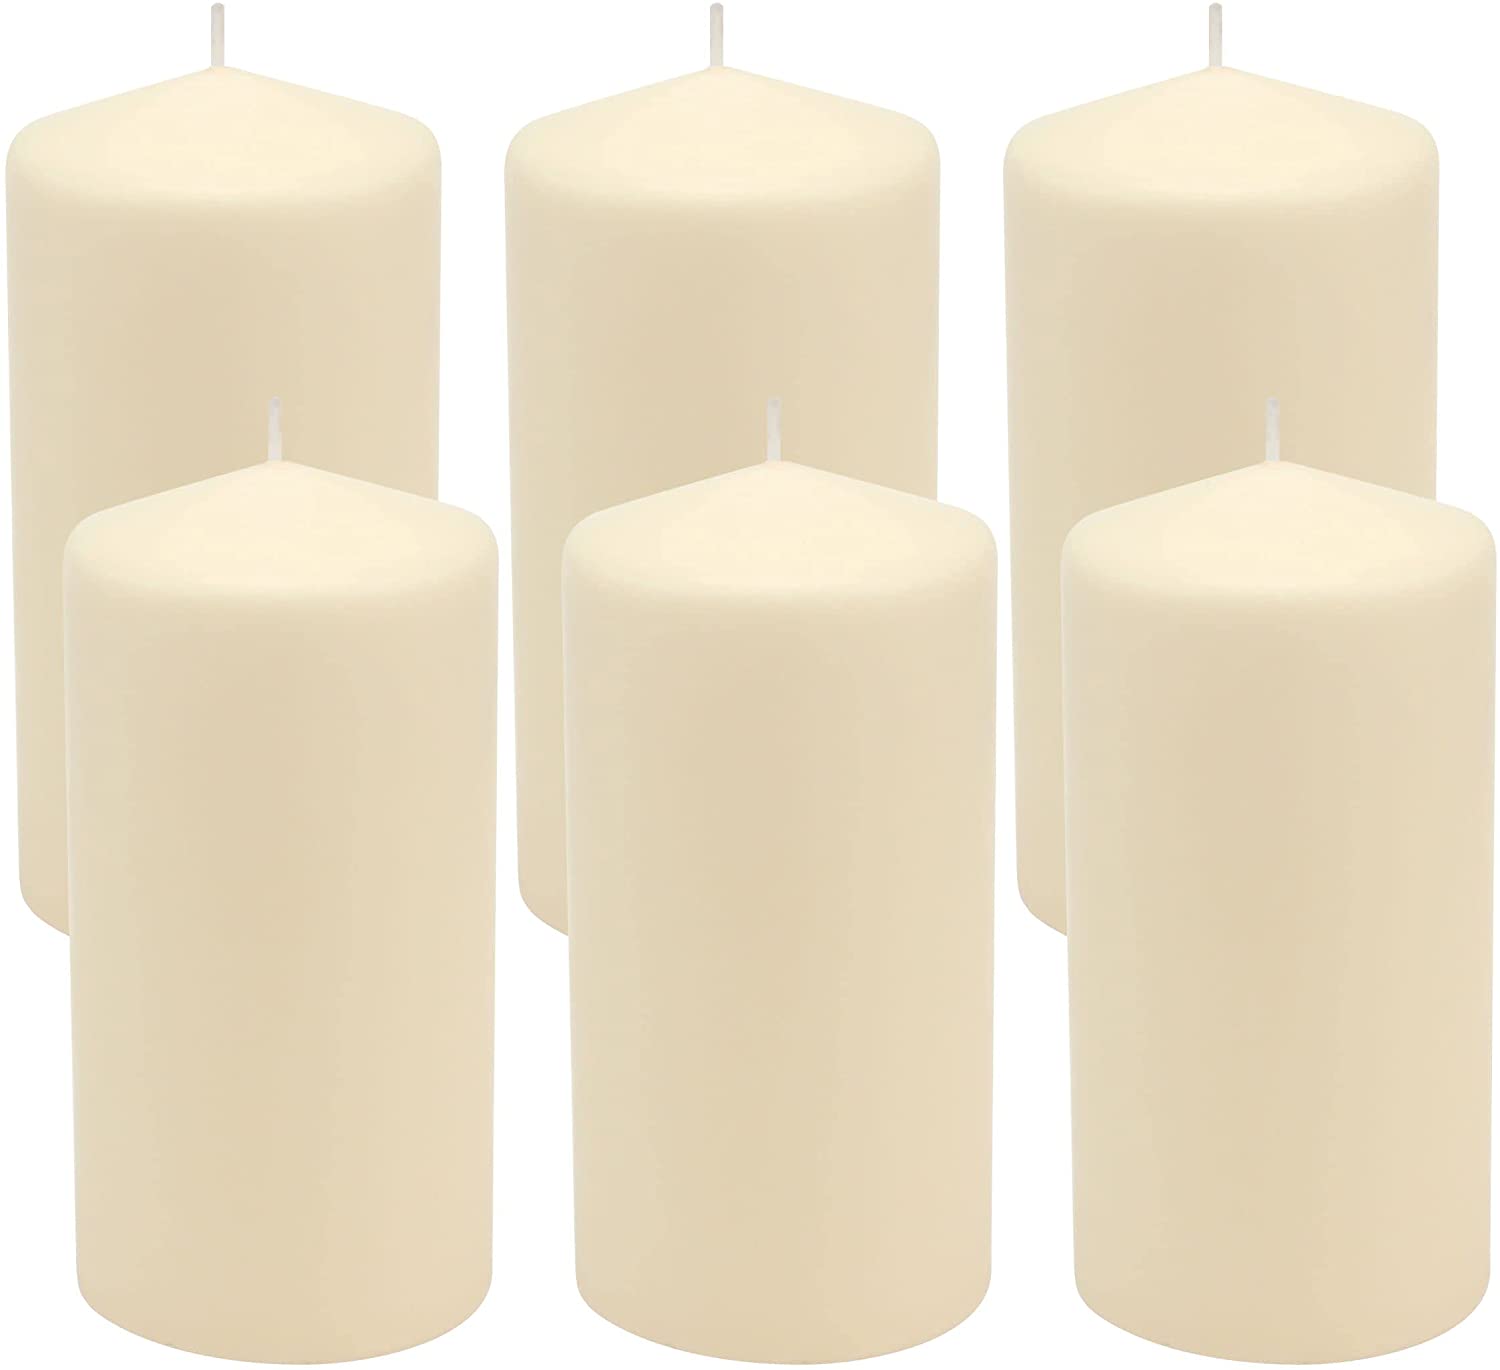 Stonebriar SB-SP-3548A Tall 3 x 6 Inch Unscented Ivory Pillar Candle Set, Set of 6